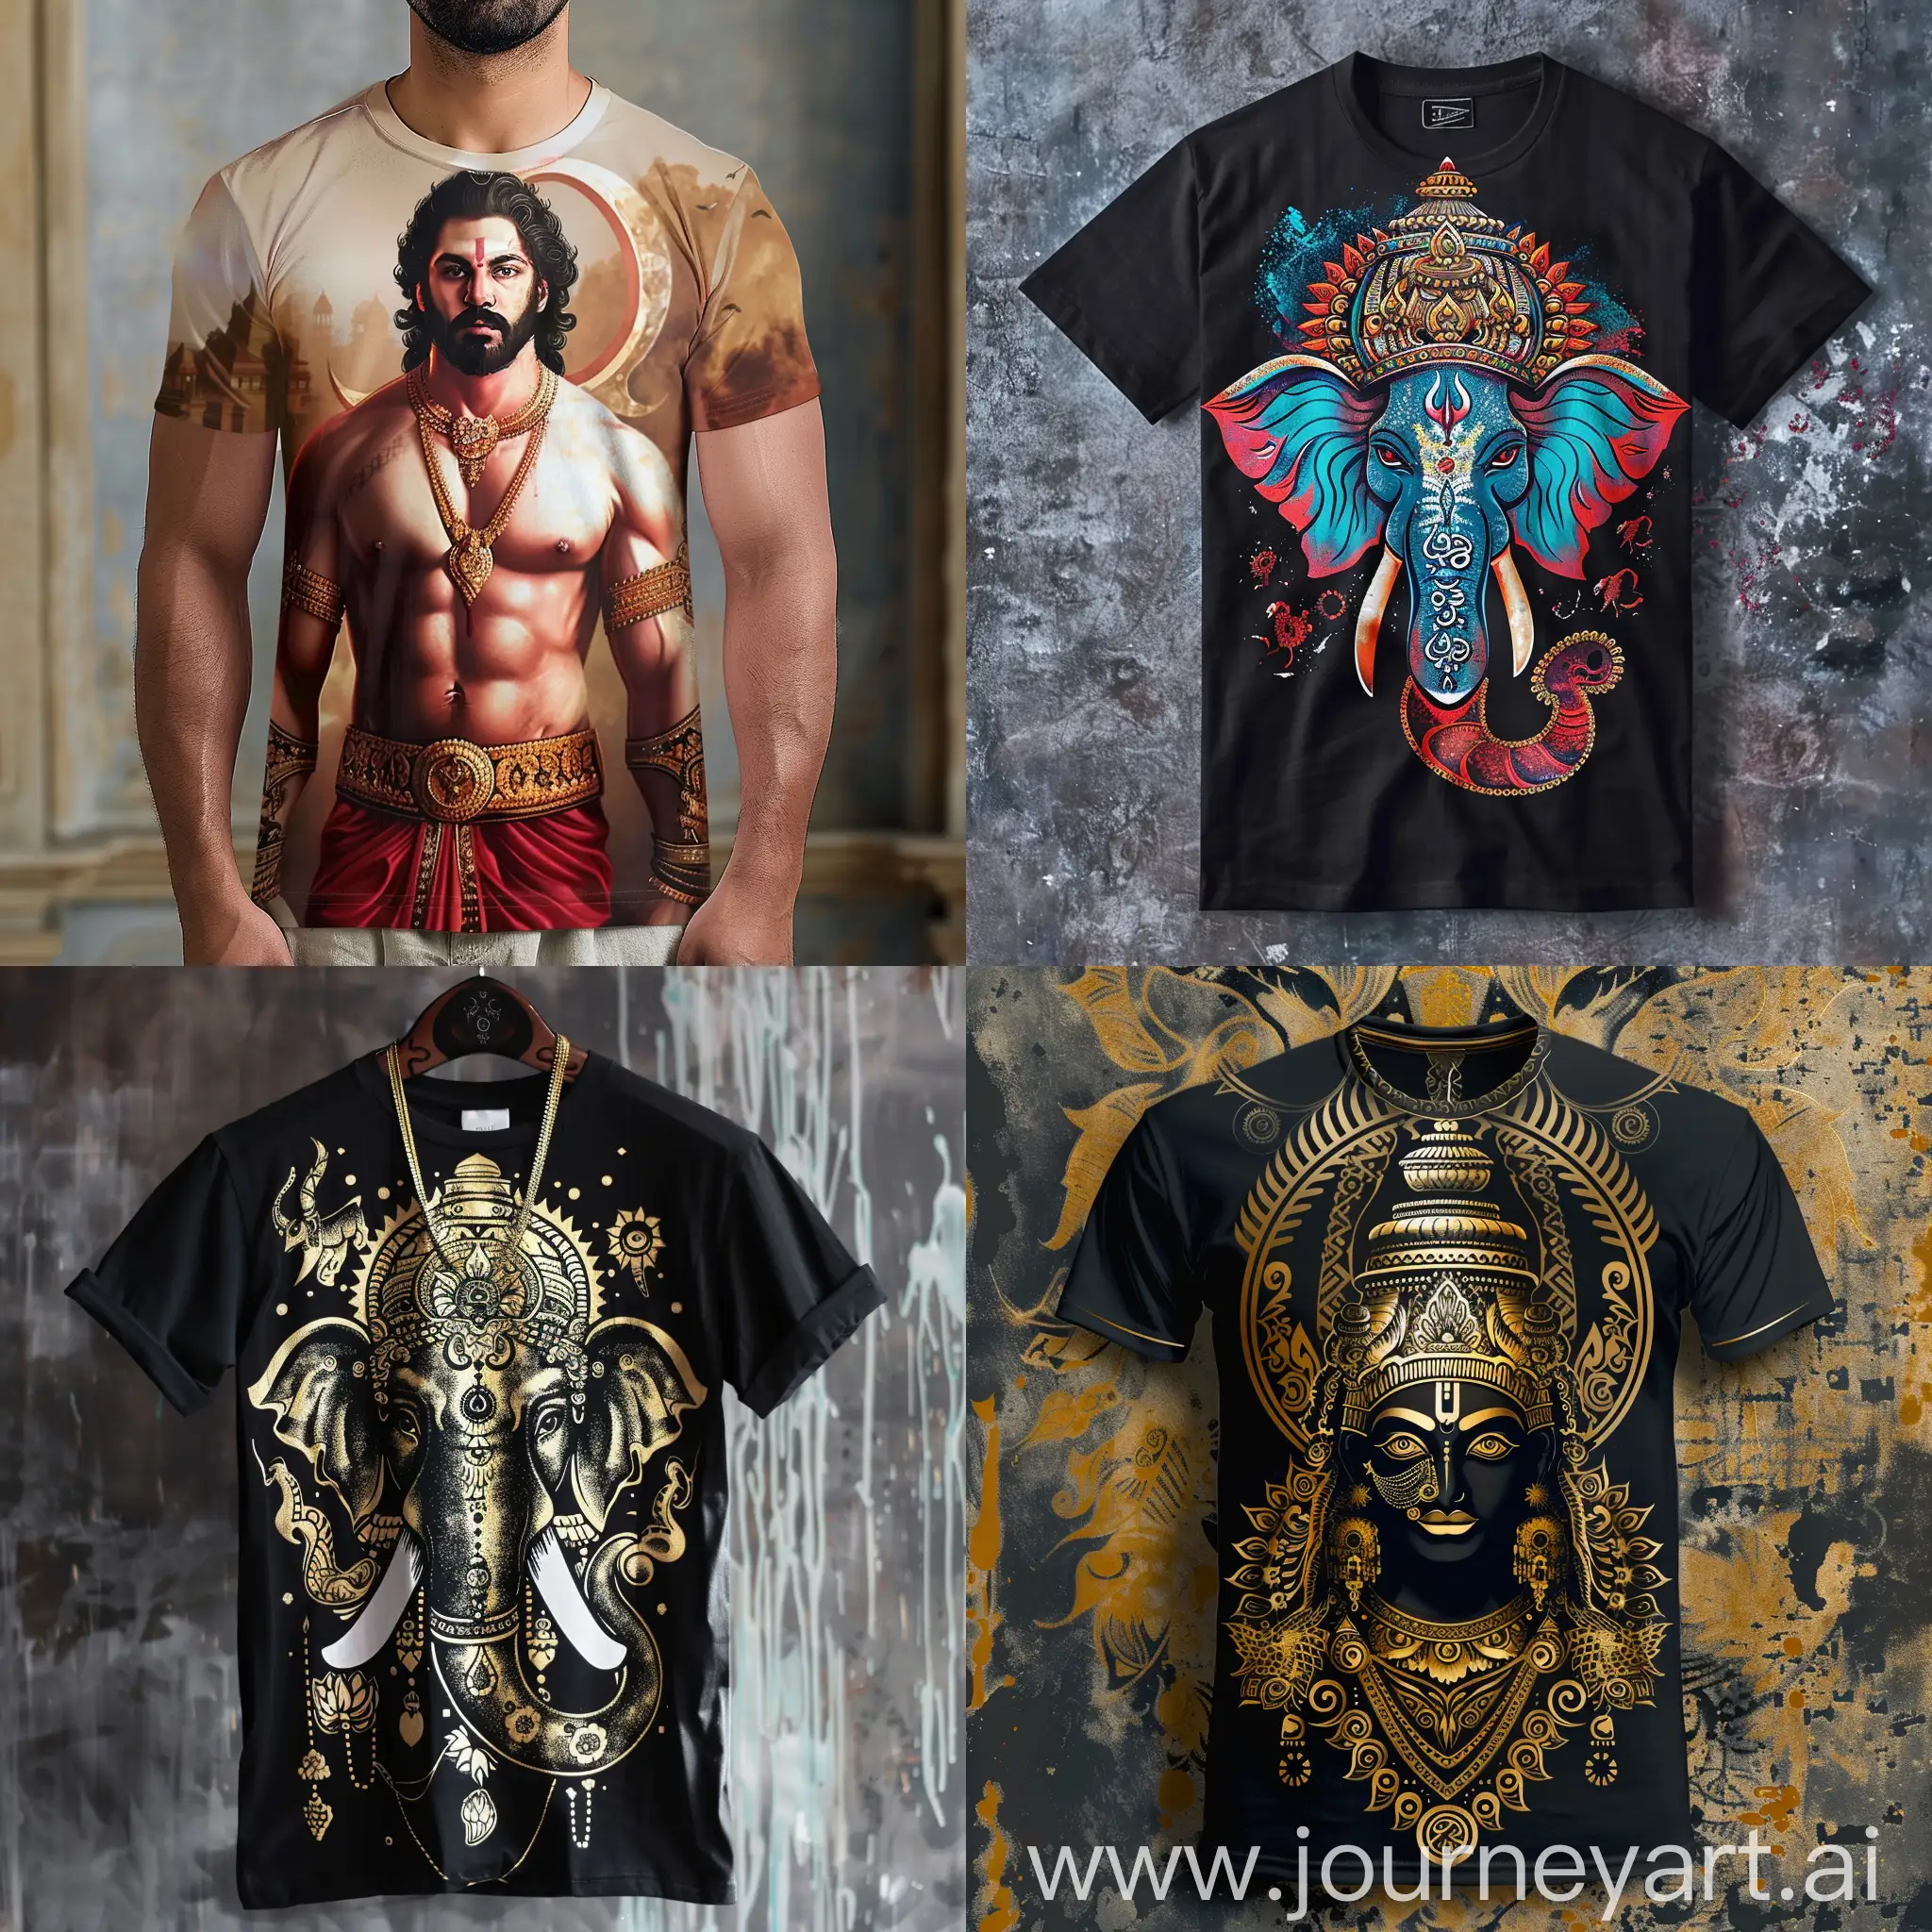 Luxury Street wear for South Indians, Name of brand god's of South. Show tshirt designs